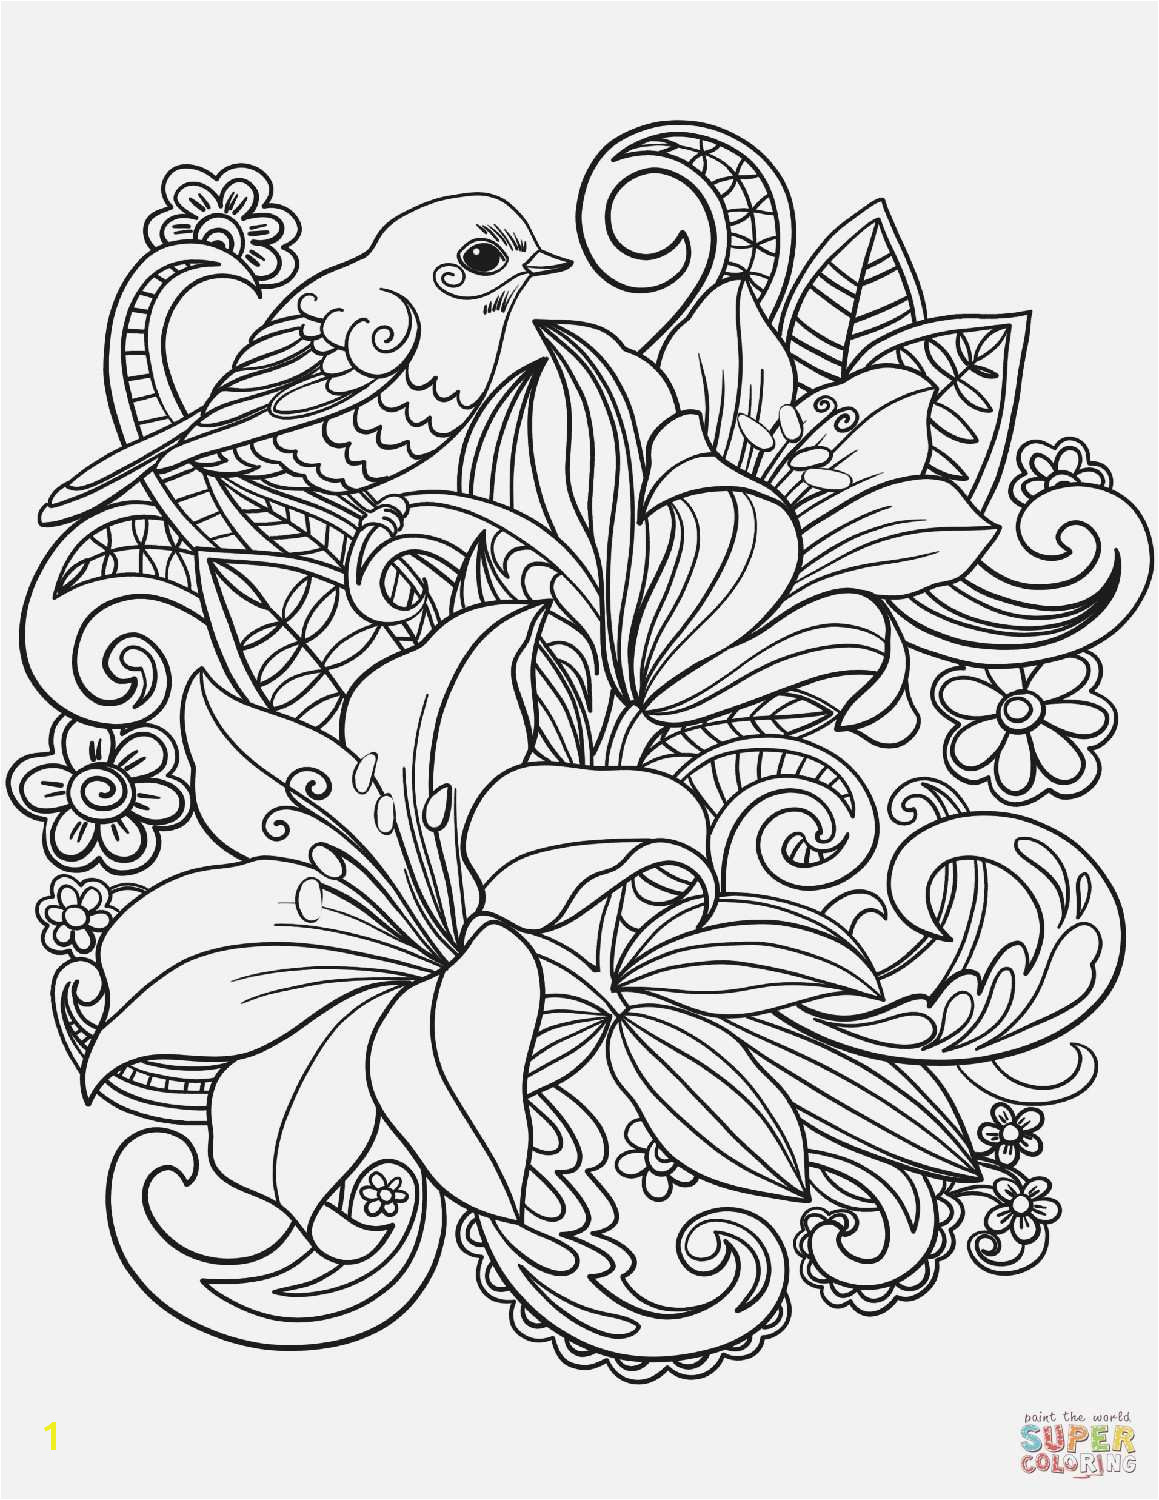 Coloring Pages Of Trees and Flowers Unique Coloring Pages Lovely Christmas Tree Cut Out Coloring Pages